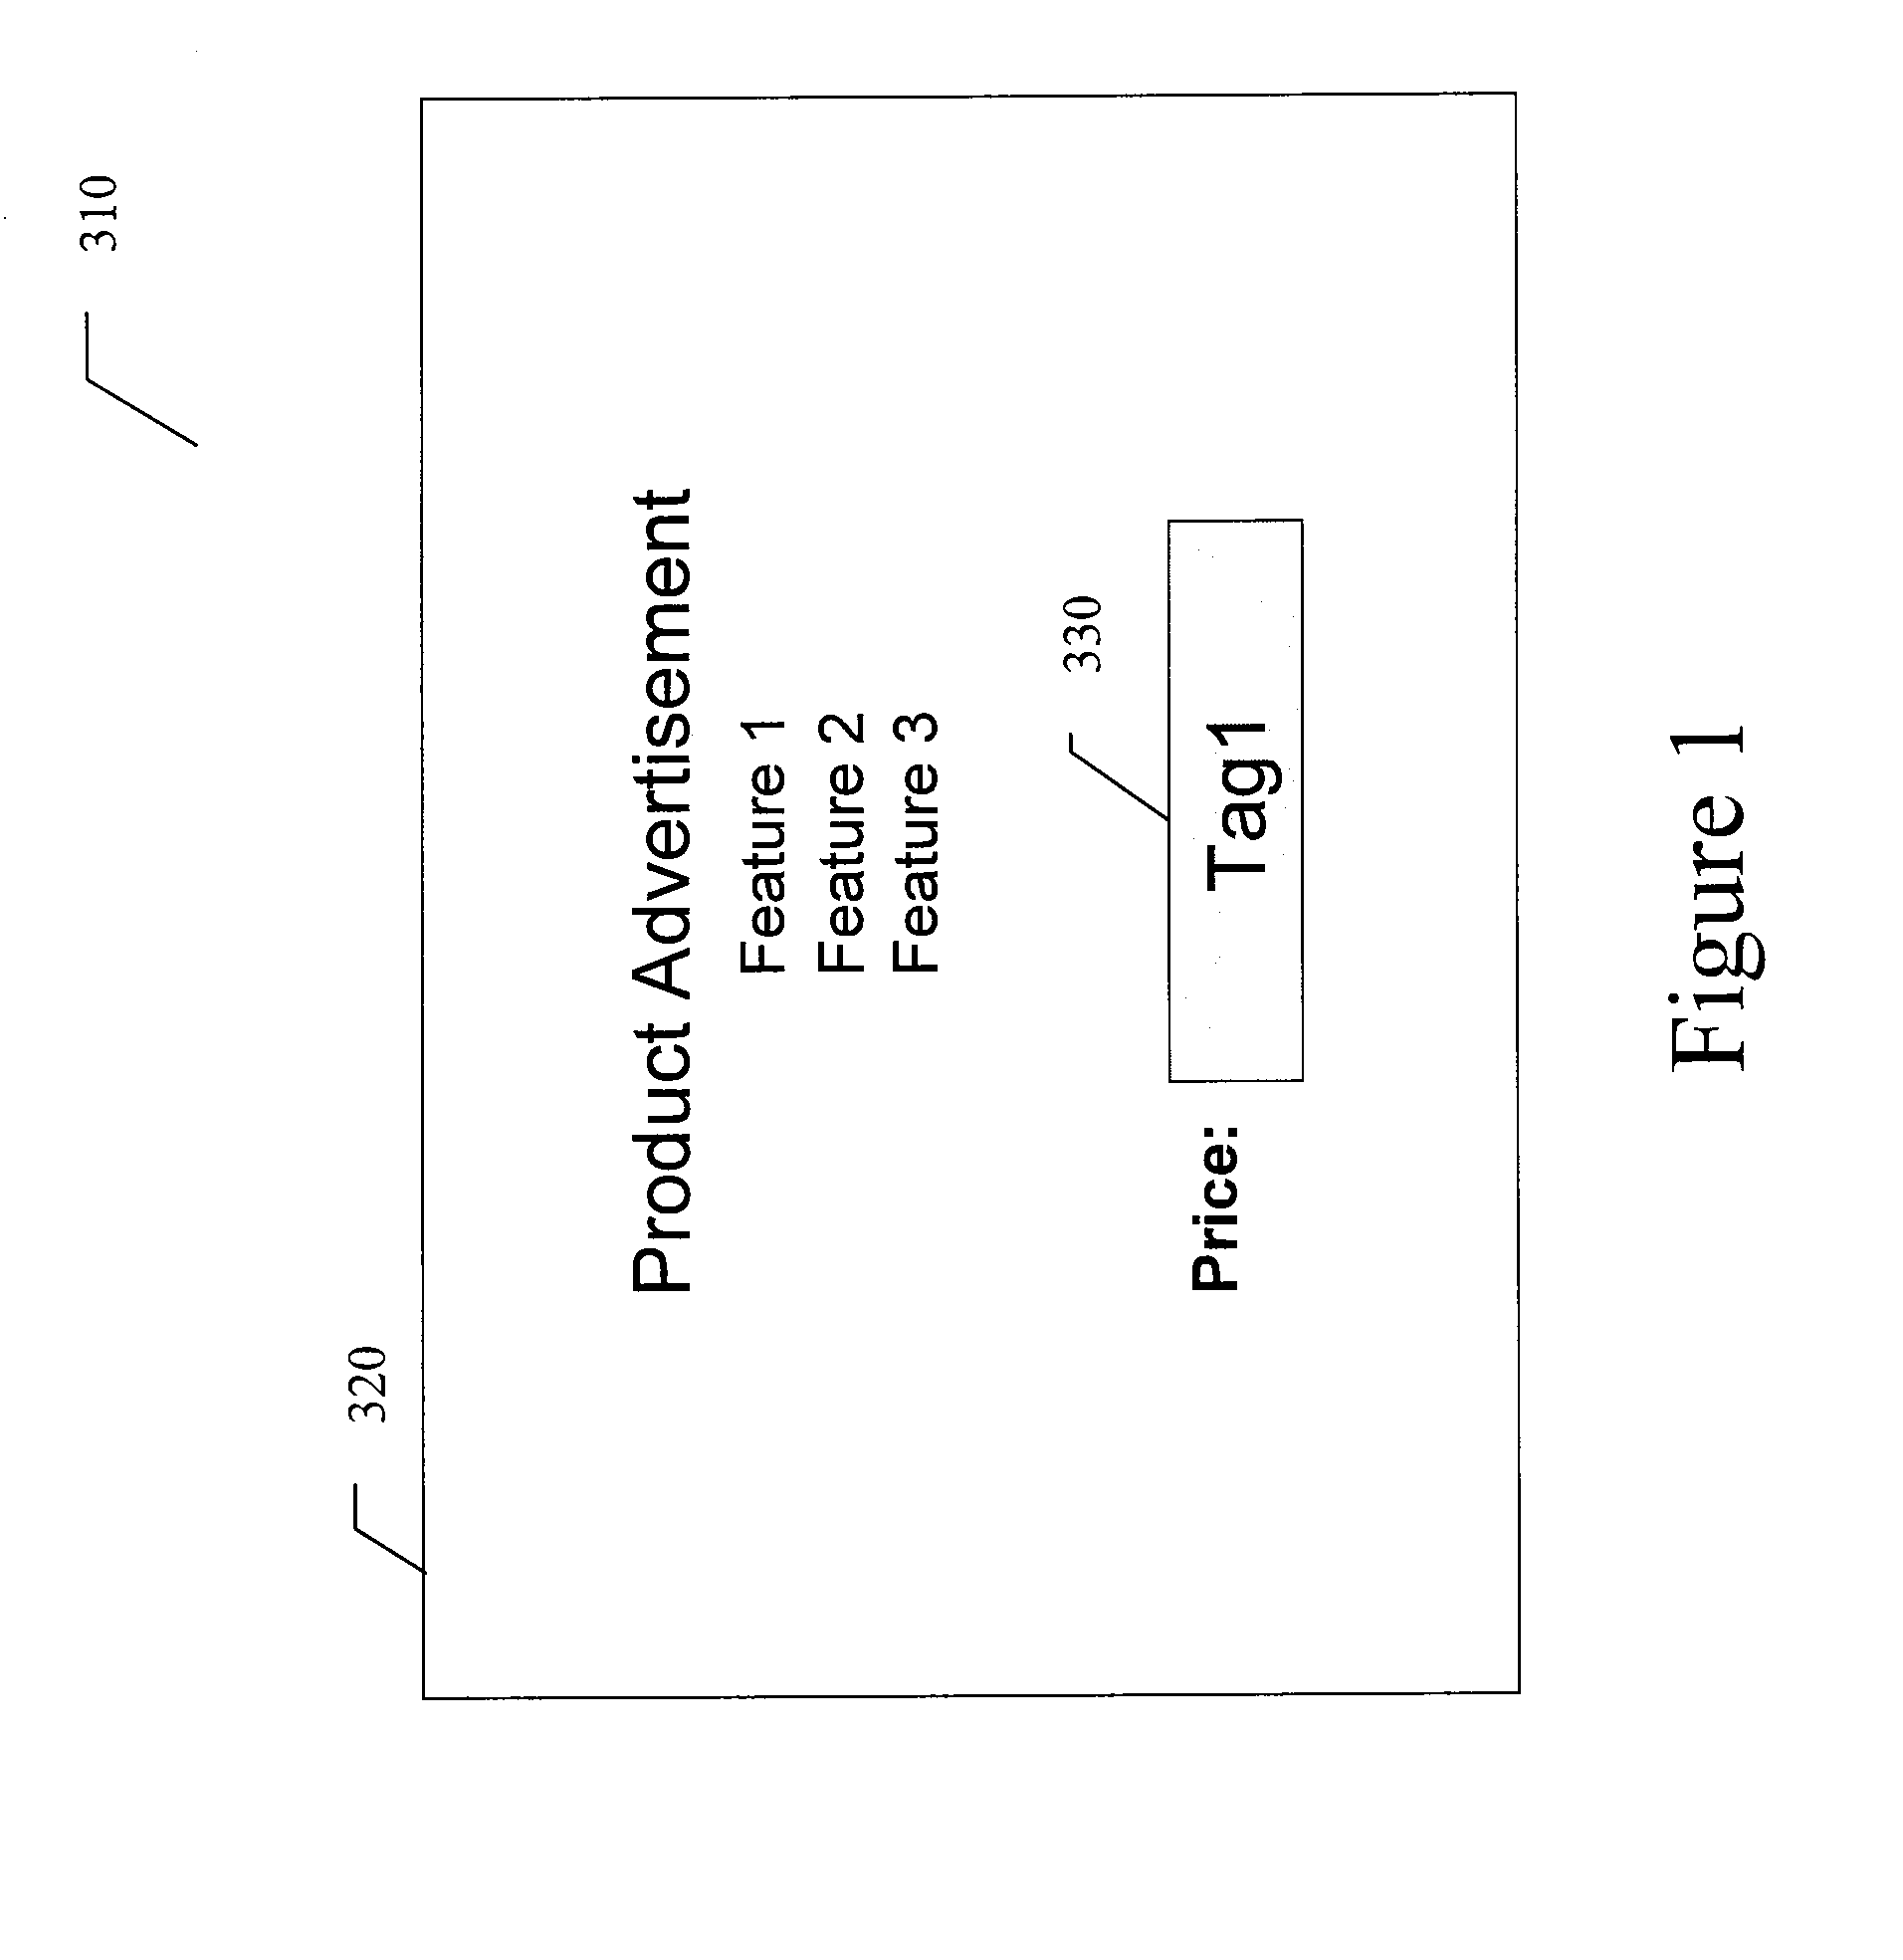 System and method for providing on-line advertising with dynamic content